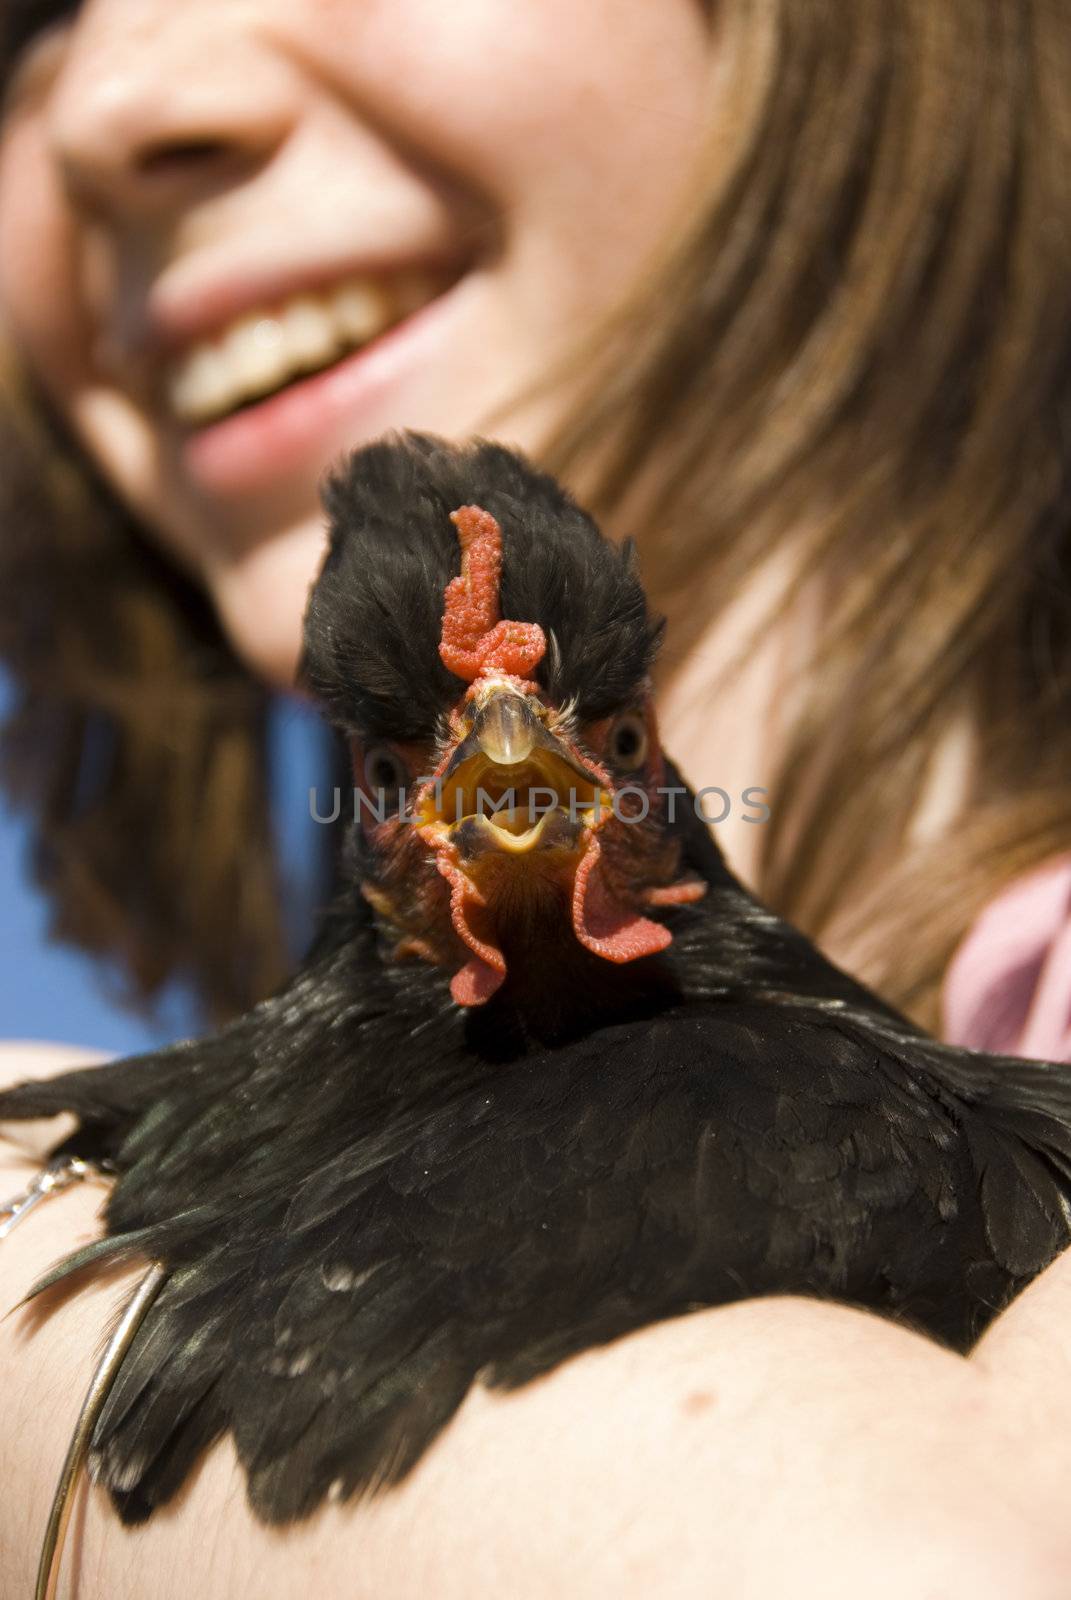 happy young girl and her little black chicken in her arm; focus on the beak